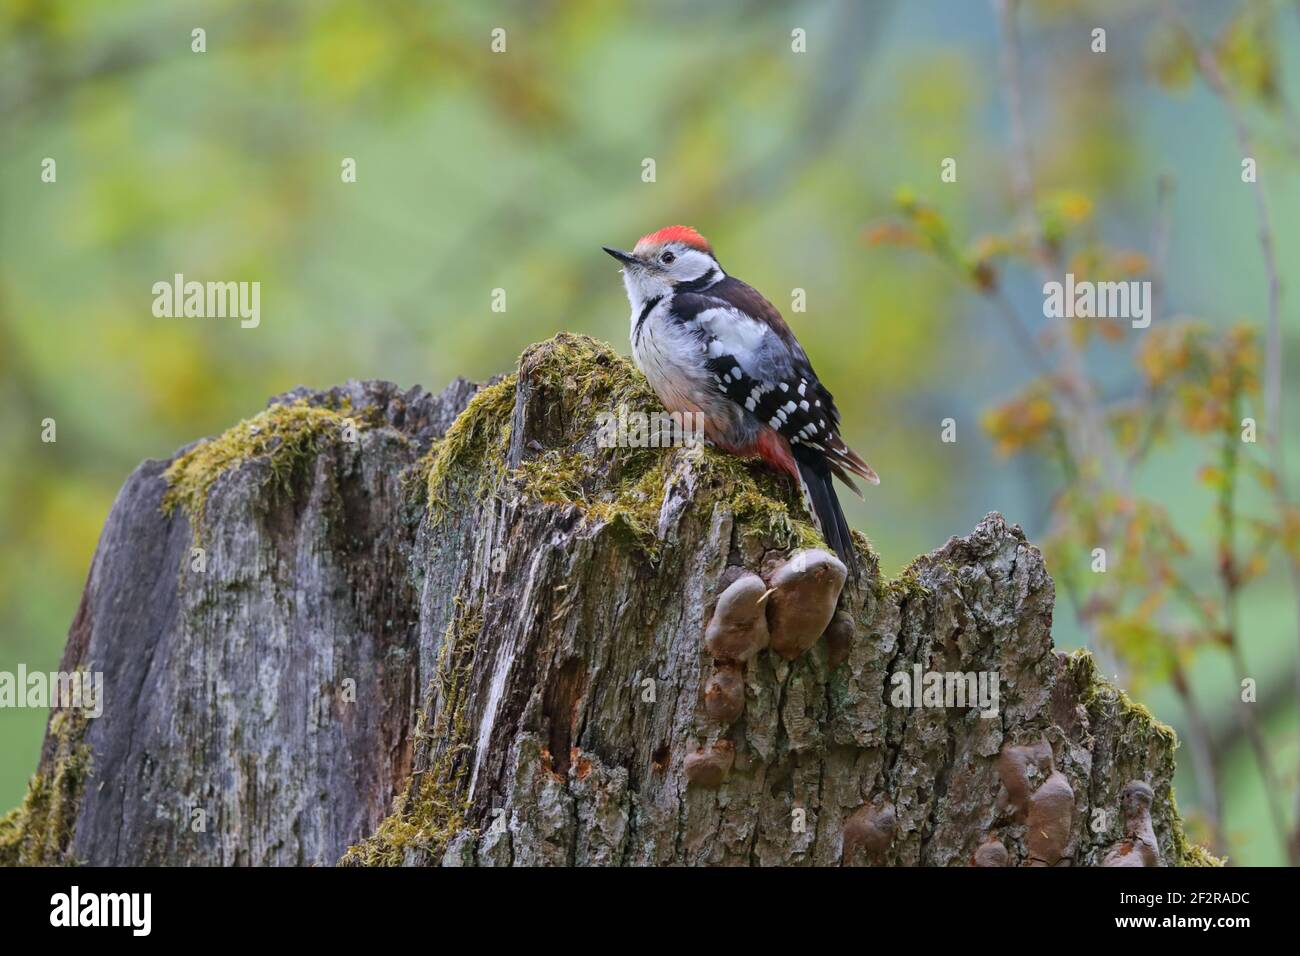 An adult female Middle spotted Woodpecker (Dendrocoptes medius) perched on a tree trunk near a nest site in the Bialowieza forest, Poland Stock Photo